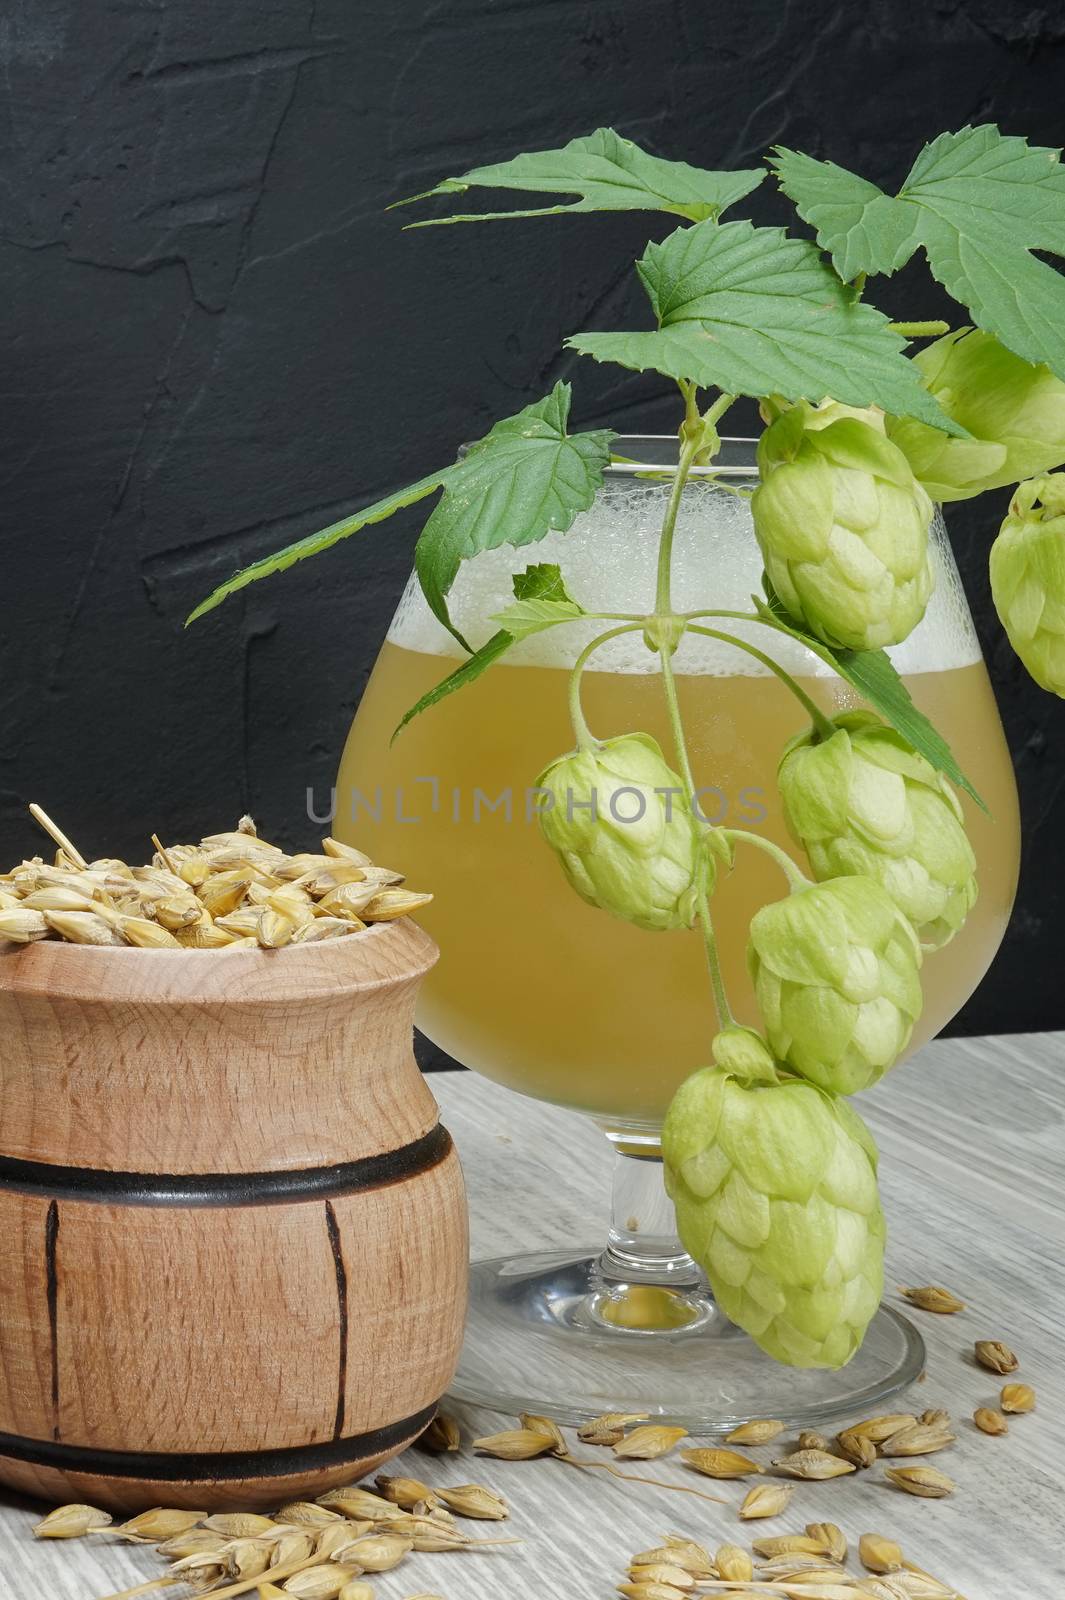 Branch of fresh hops on the plant with frothy beer or ale in a tall stemmed goblet behind and a container of barley seeds in a concept of making homemade or artisan beer